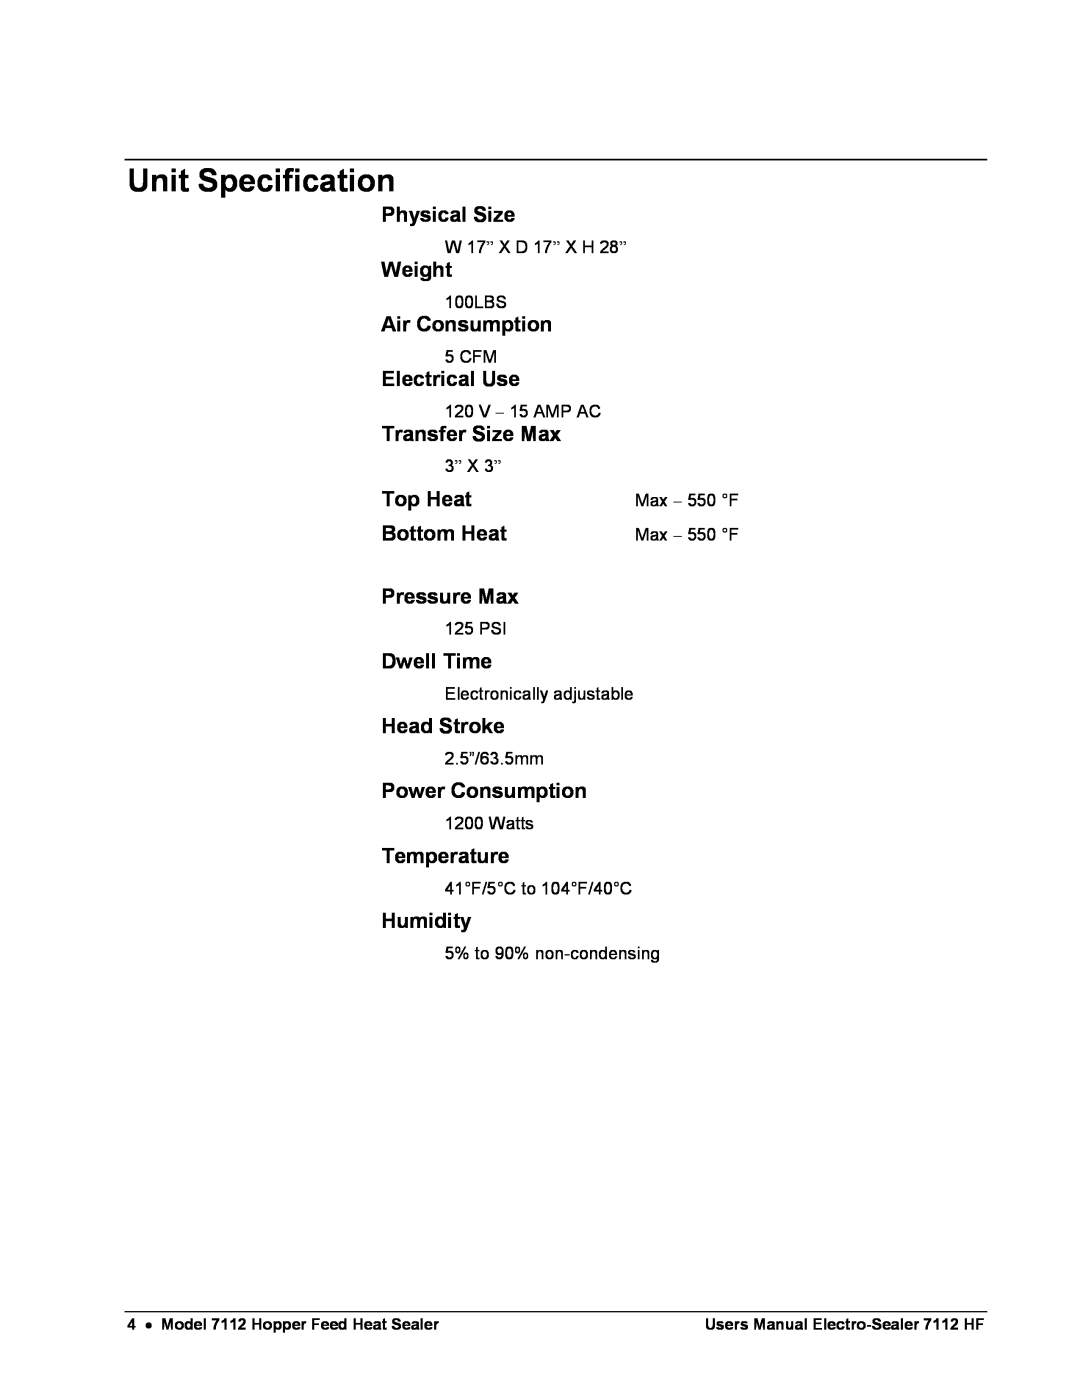 Avery 7112 HF user manual Unit Specification 